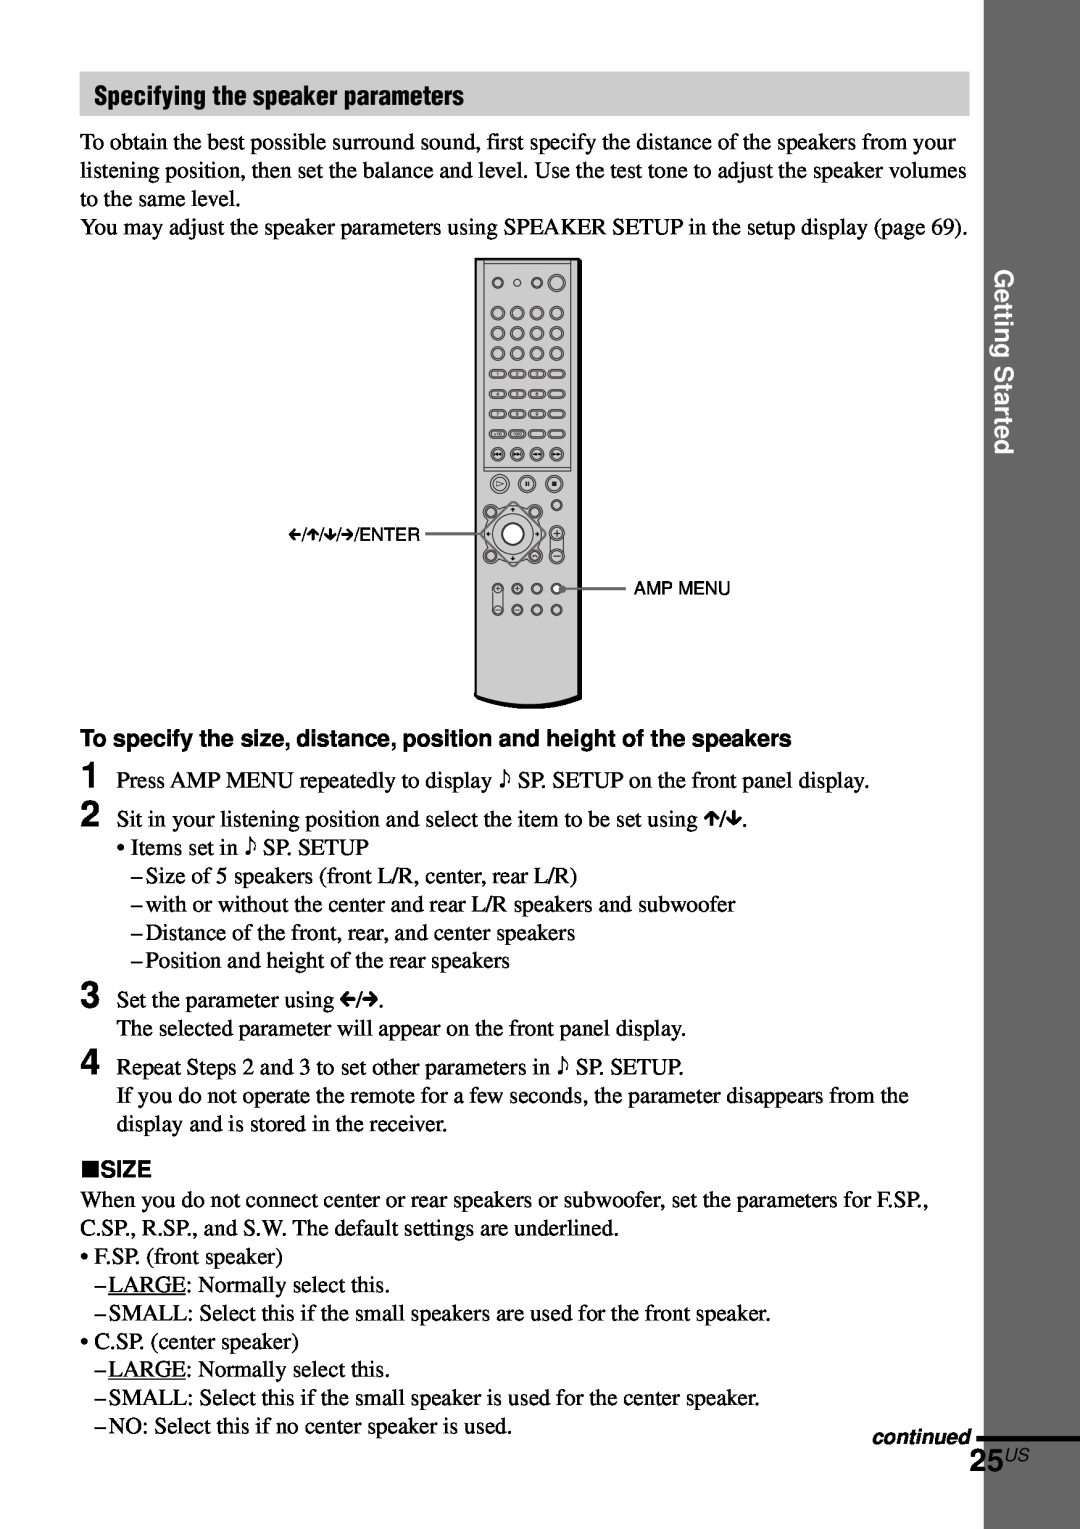 Sony AVD-S50ES operating instructions 25US, Specifying the speaker parameters, xSIZE, Getting Started 